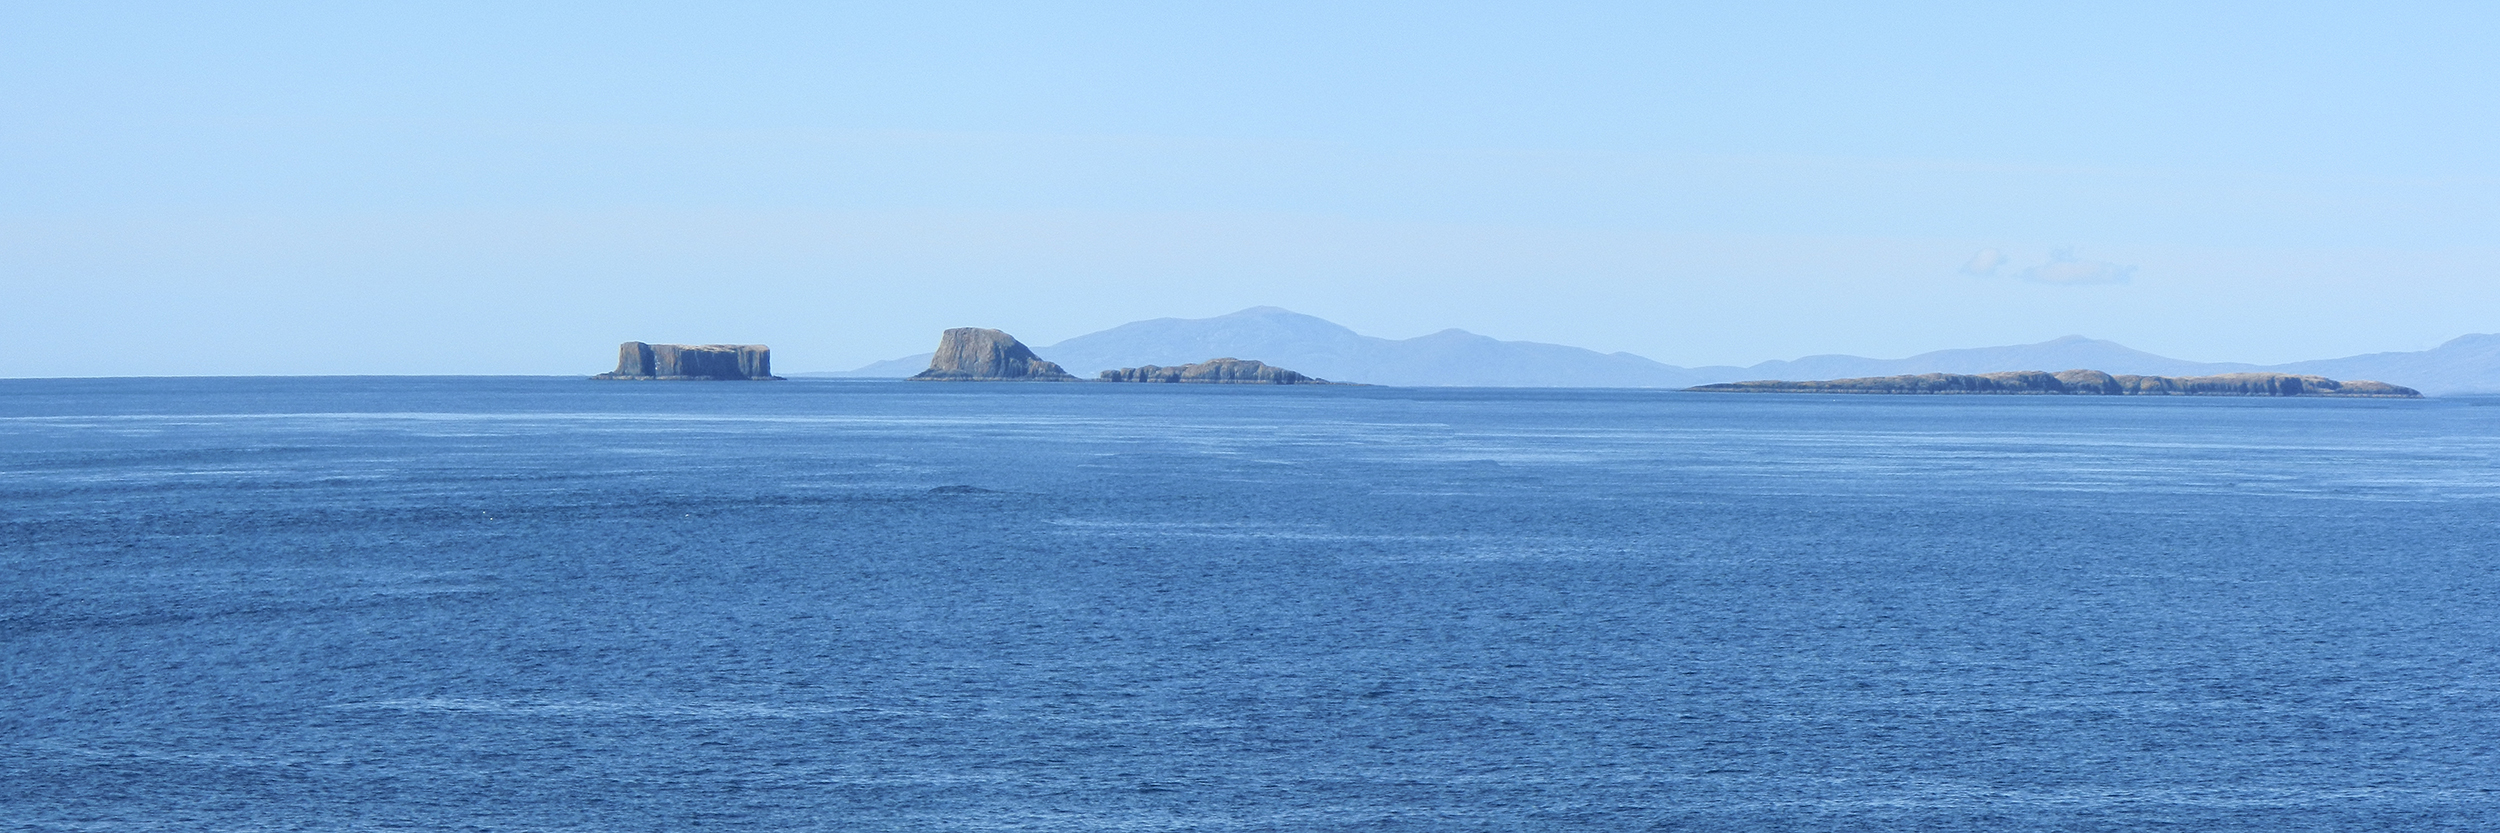 Islands in the Minch